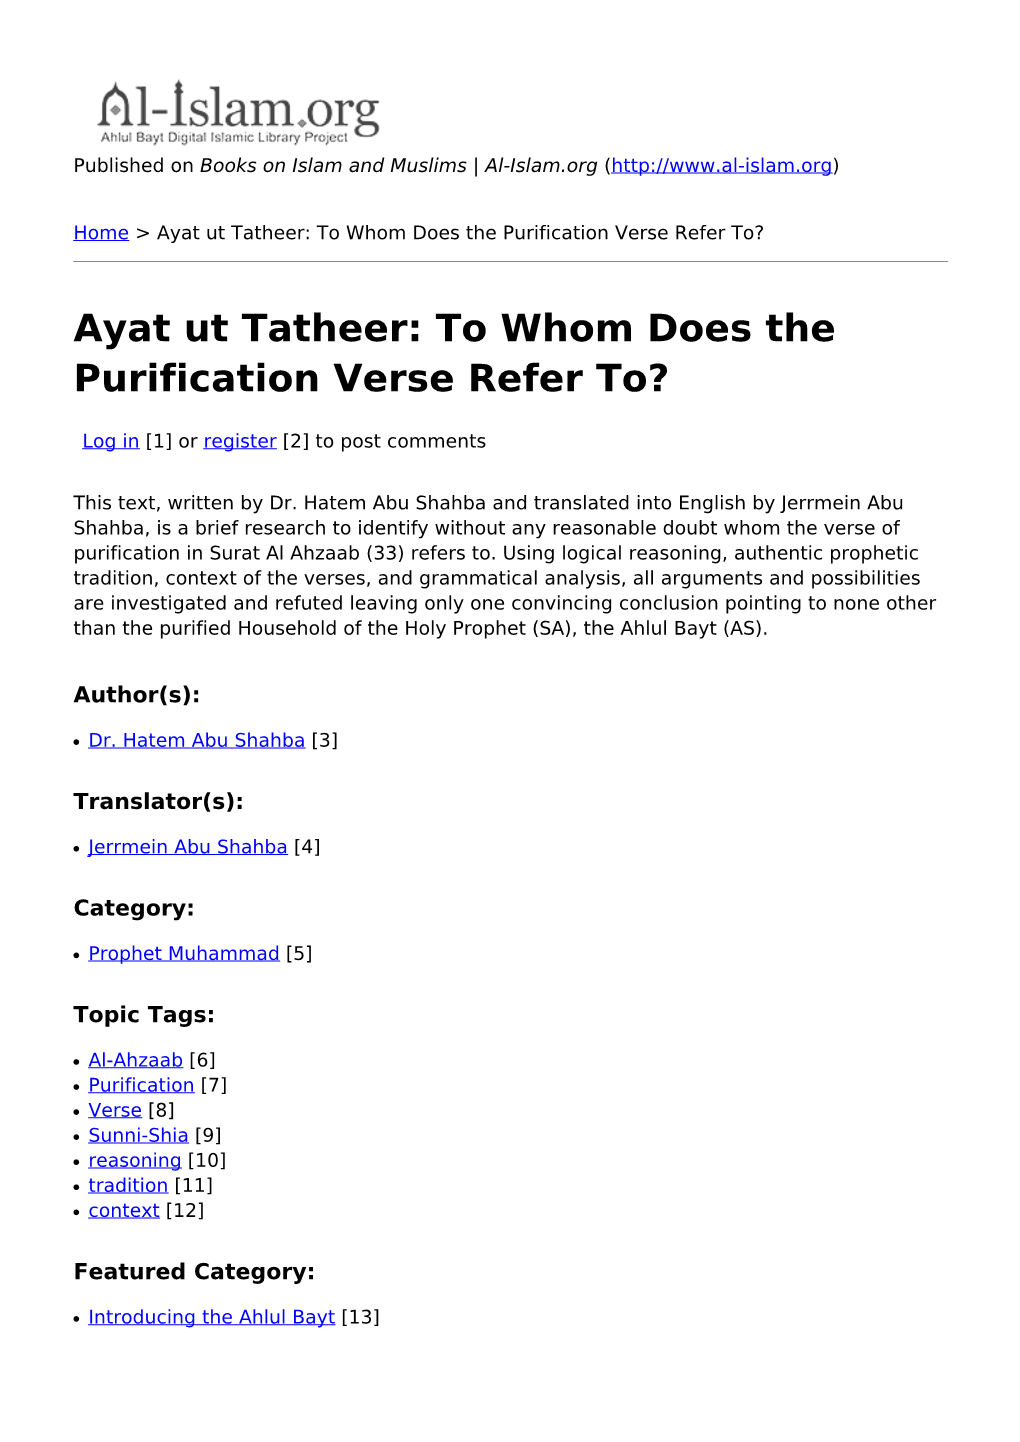 Ayat Ut Tatheer: to Whom Does the Purification Verse Refer To?